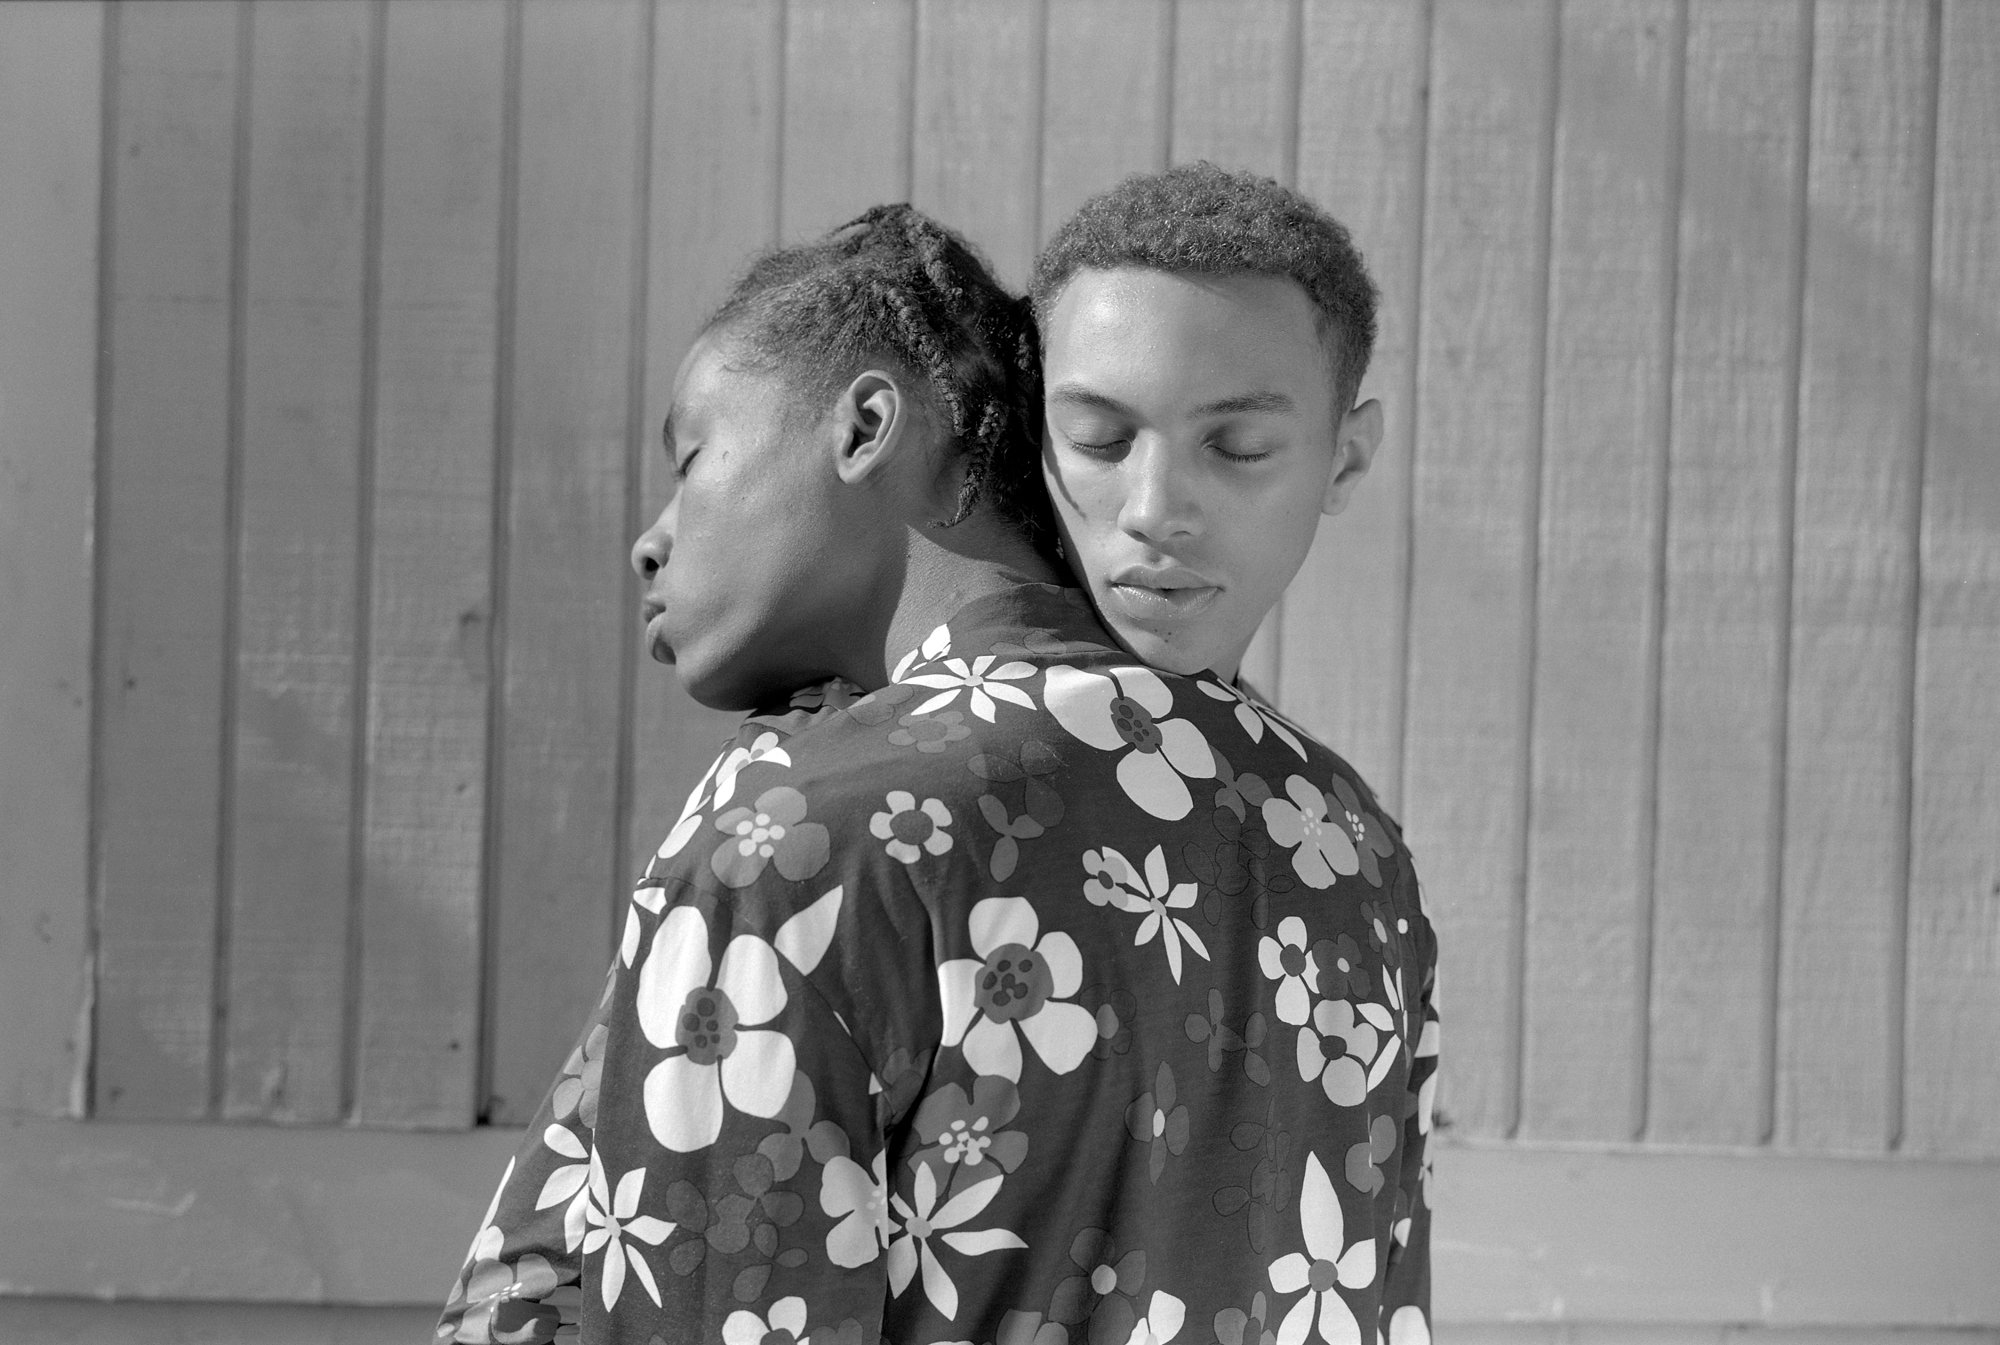 Two young people with dark skin in a sort of embrace, with eyes closed. Both are wearing shirts with abstracted floral illustrations. One has their back turned to the camera and head turned to the side, and the other is resting their head on the shoulders of the first one, facing the camera. 